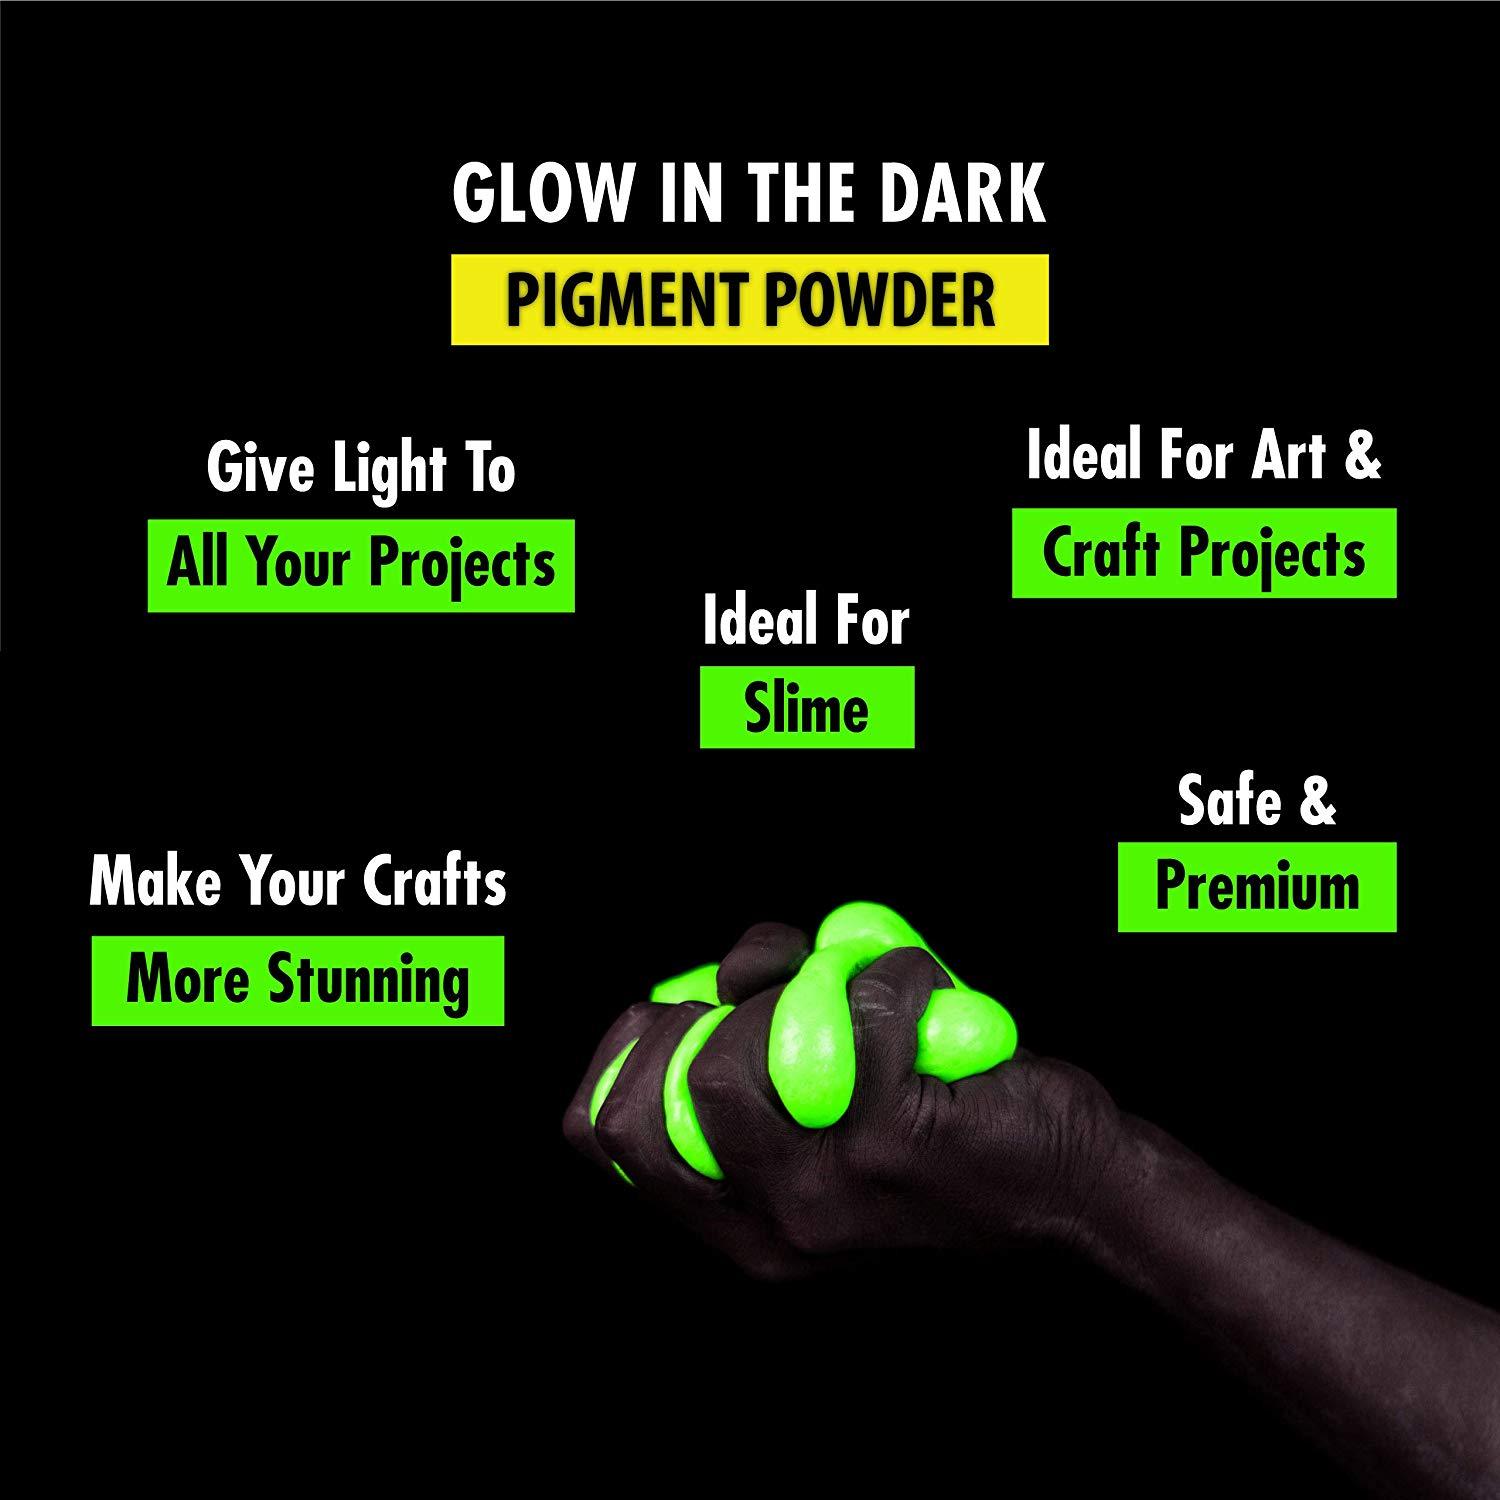 Glow in the Dark Powder - 72 PACK Bulk Party Supplies Favors and Decorations Works Great in addition with Sticks, Necklaces, Glasses, Luminous Pigment Powder Fluorescent UV Neon Dye Dust G - image 5 of 7